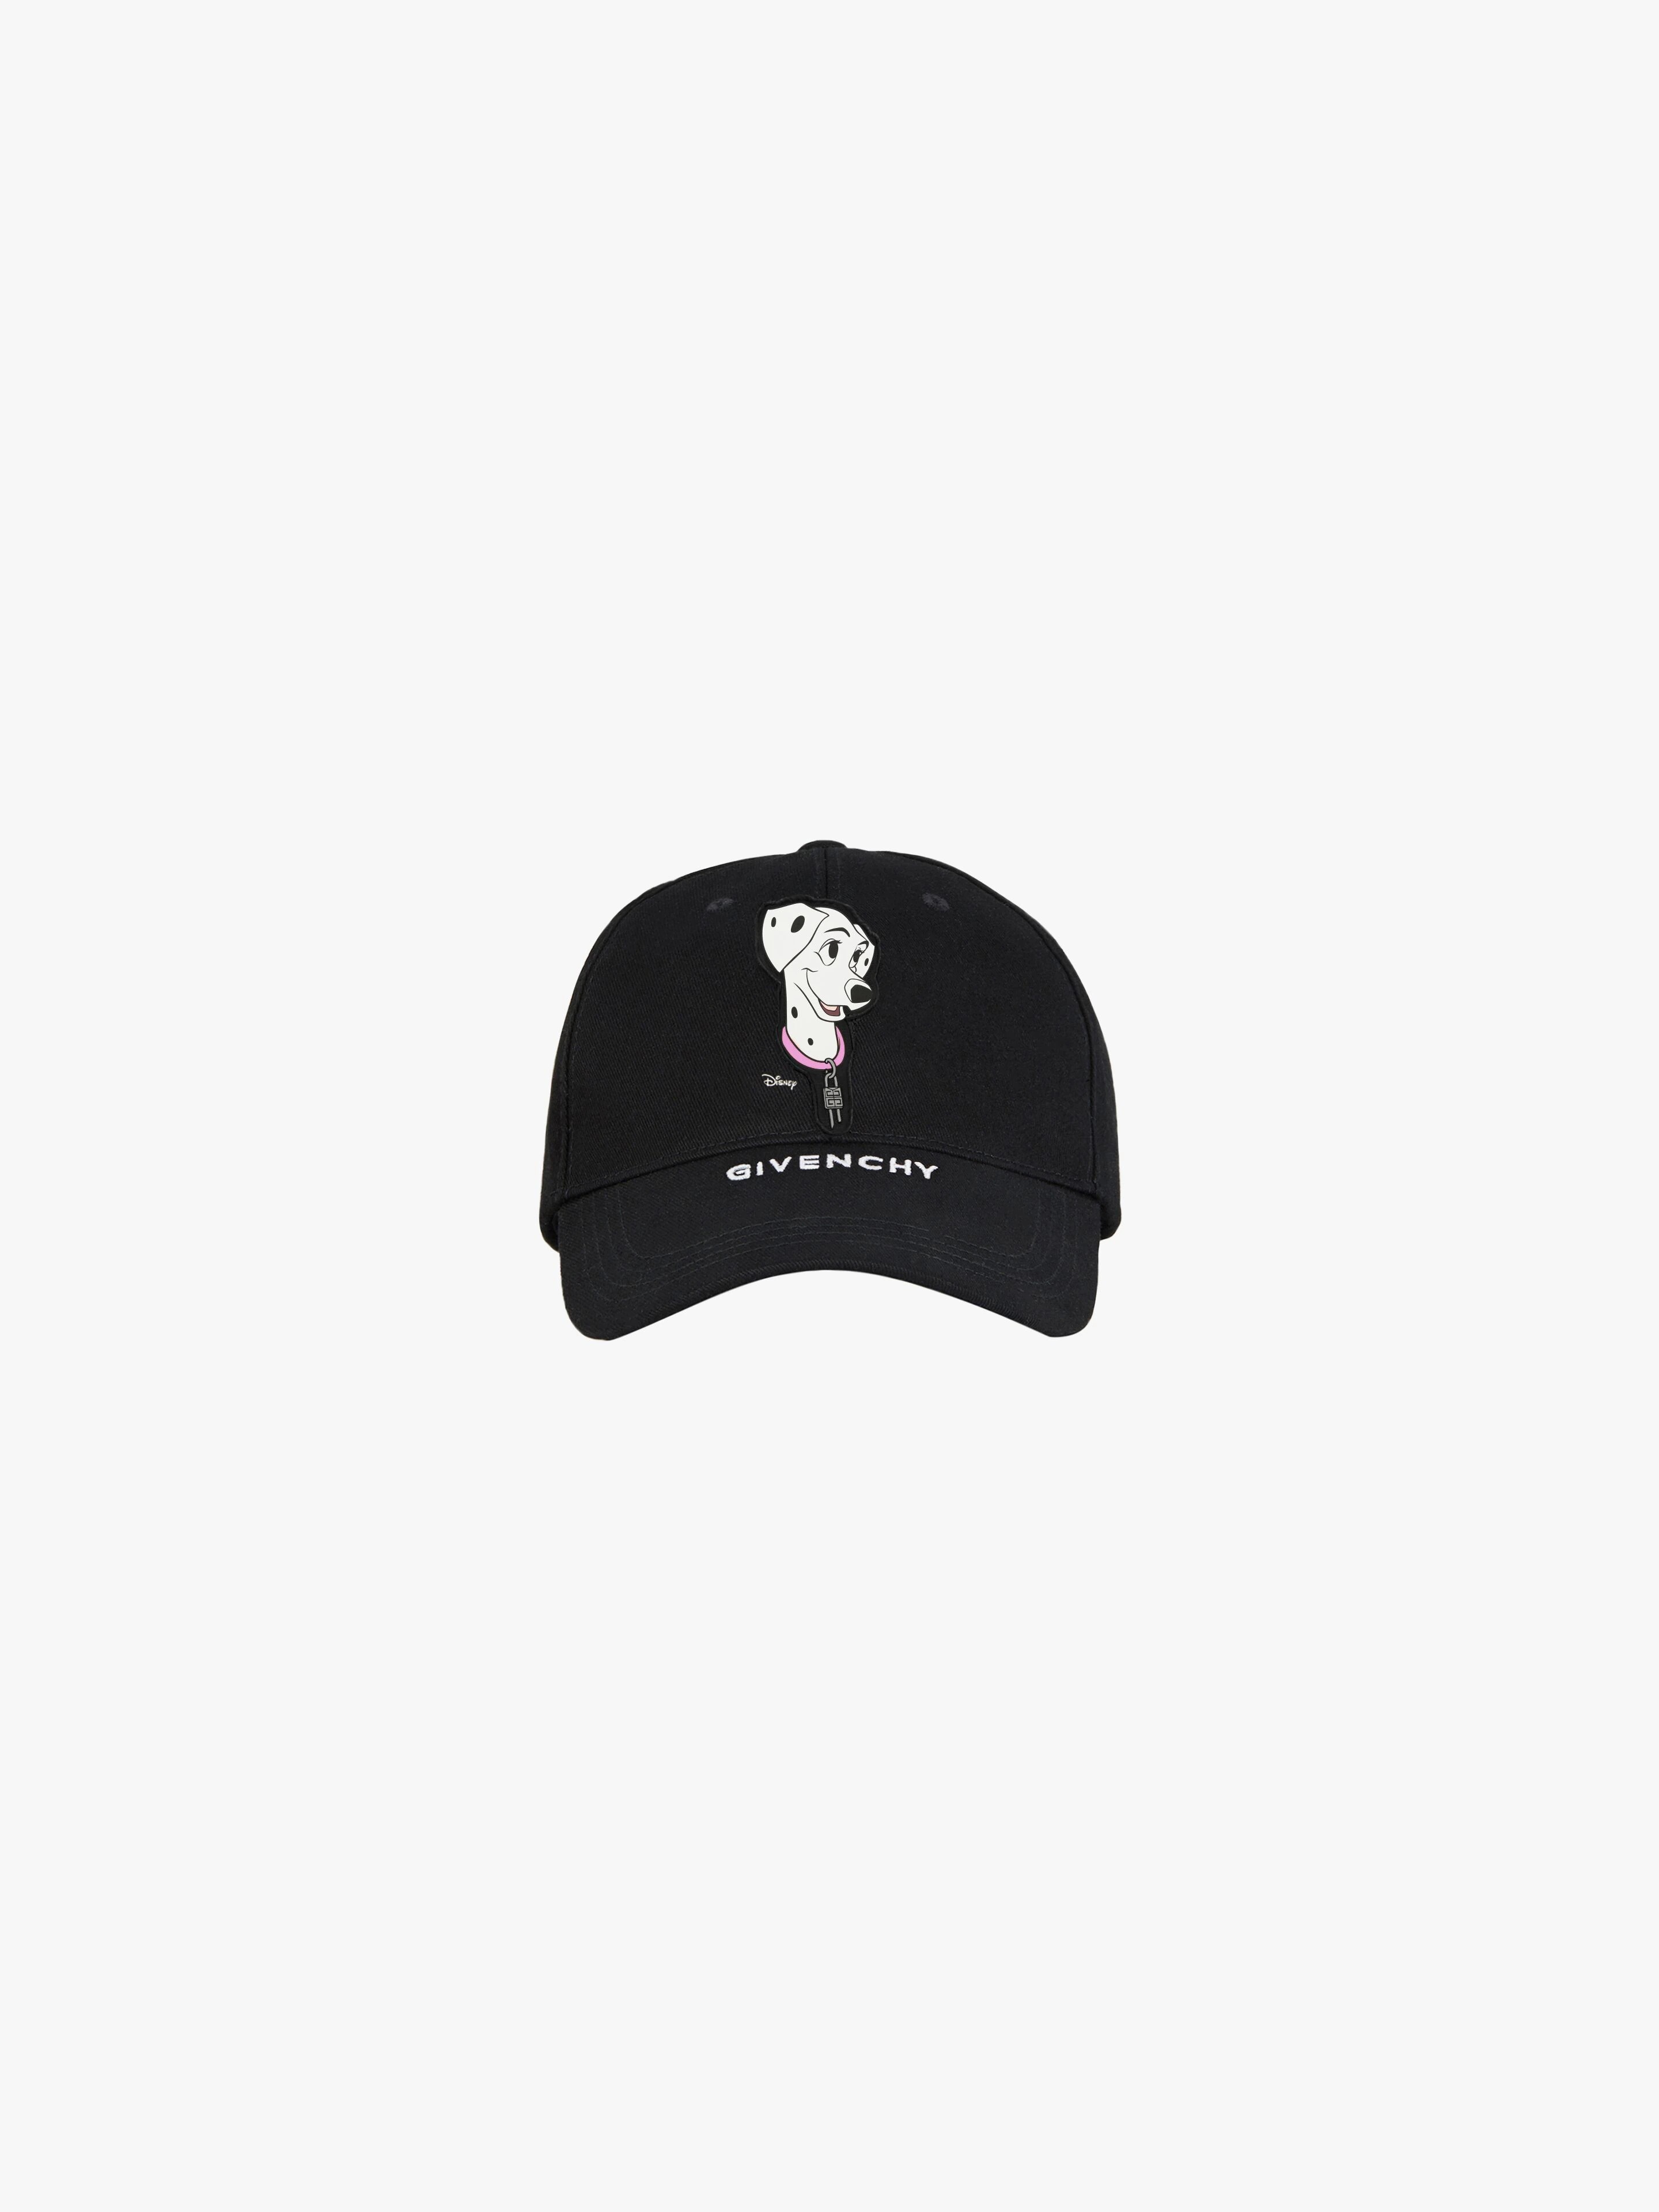 GIVENCHY 101 DALMATIANS CAP WITH PATCH - 1